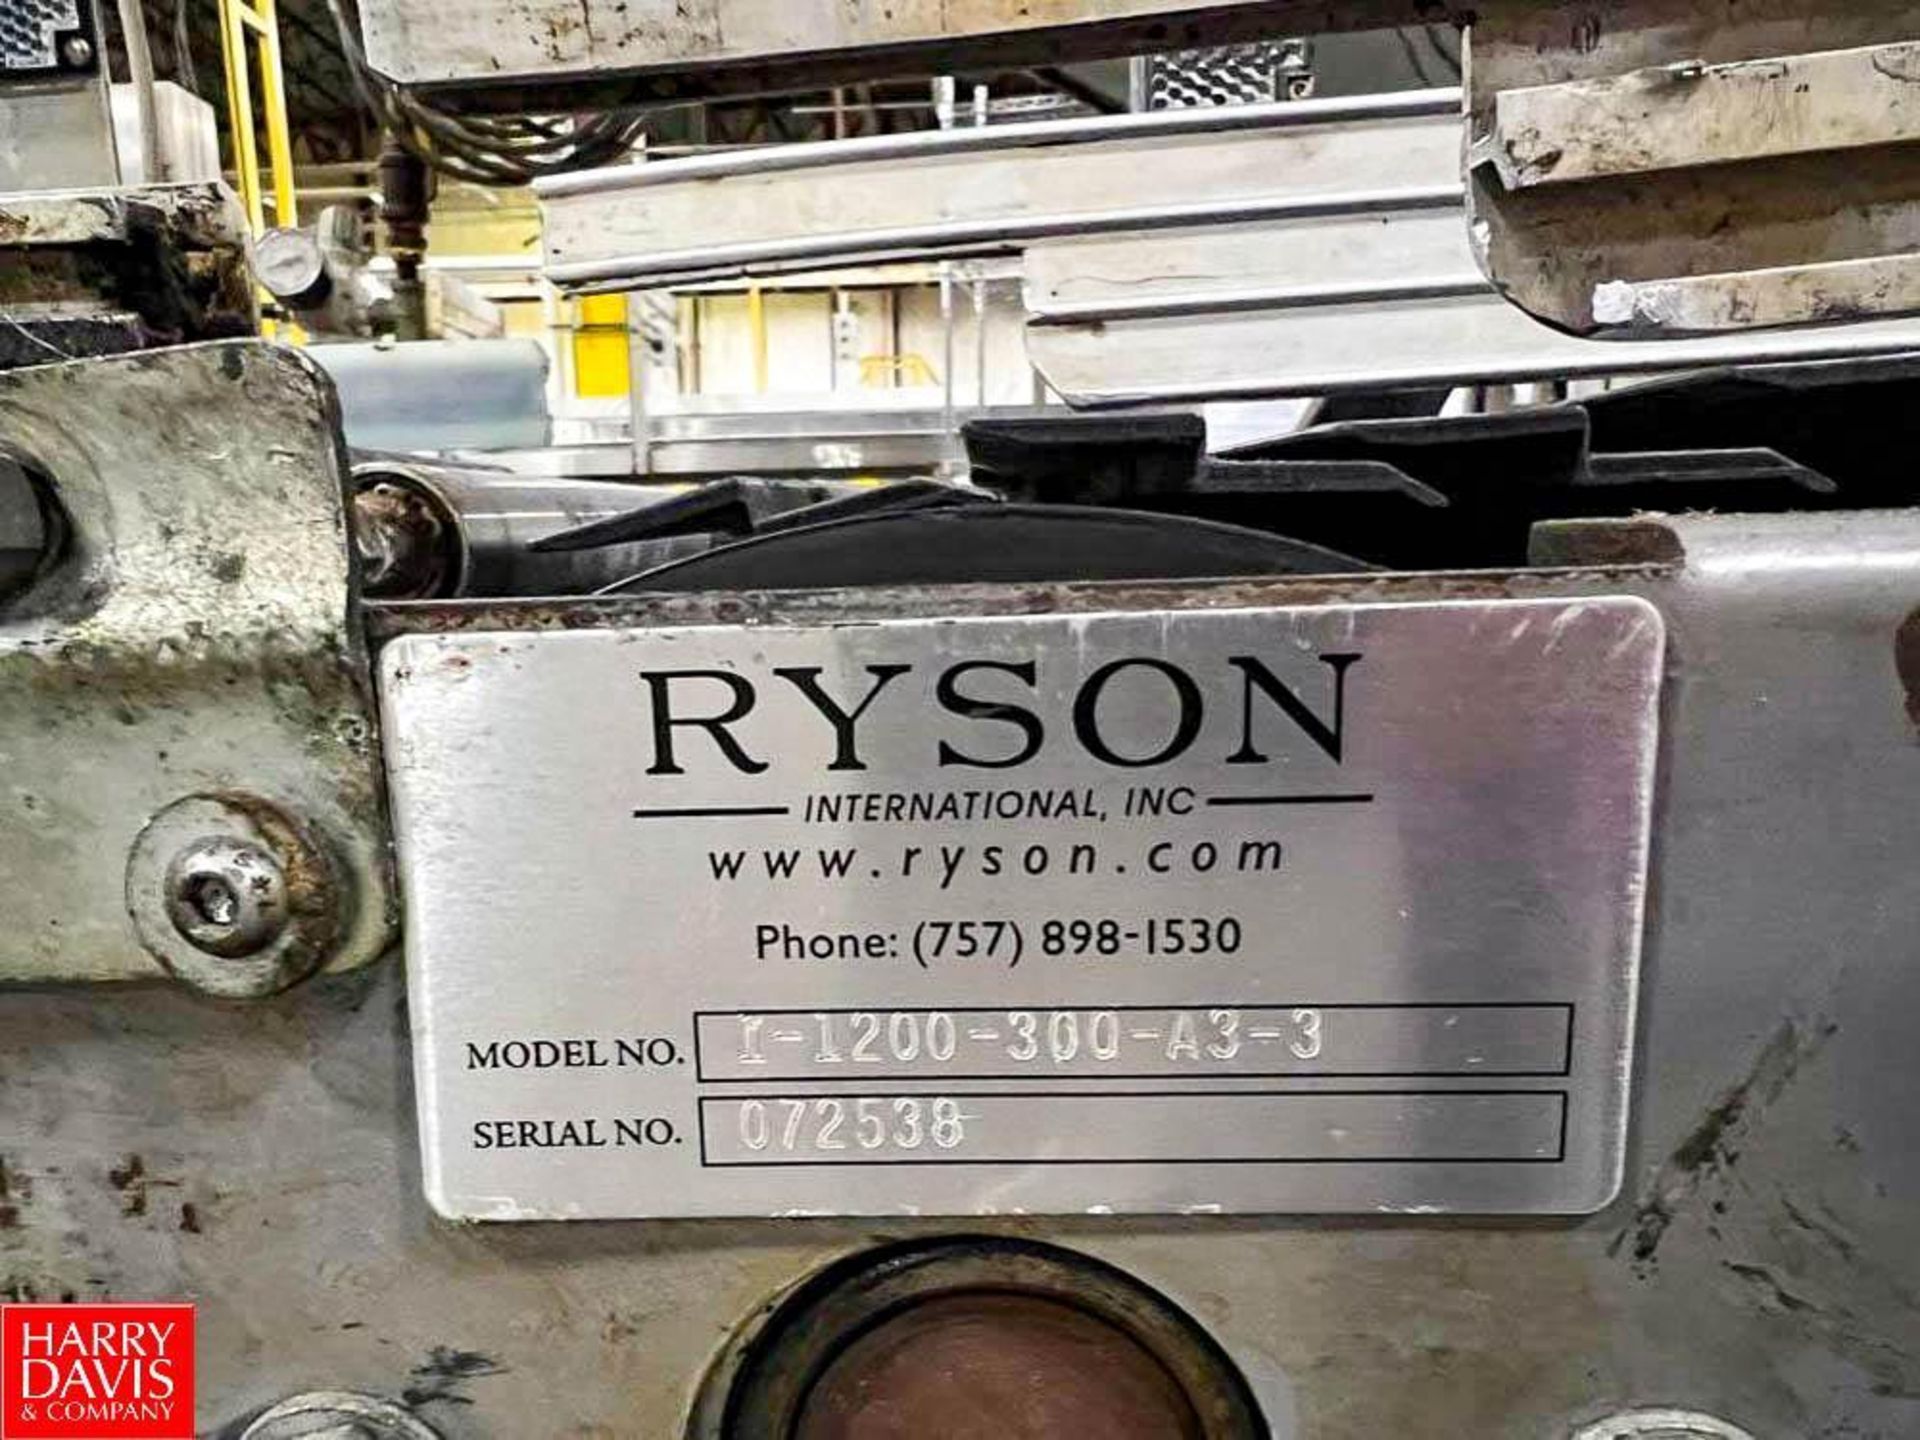 Ryson Spiral Conveyor with Elevator, Model: 1-1200-300-A3-3, S/N: 72538, Dimensions = 9' Drop x 12" - Image 2 of 2